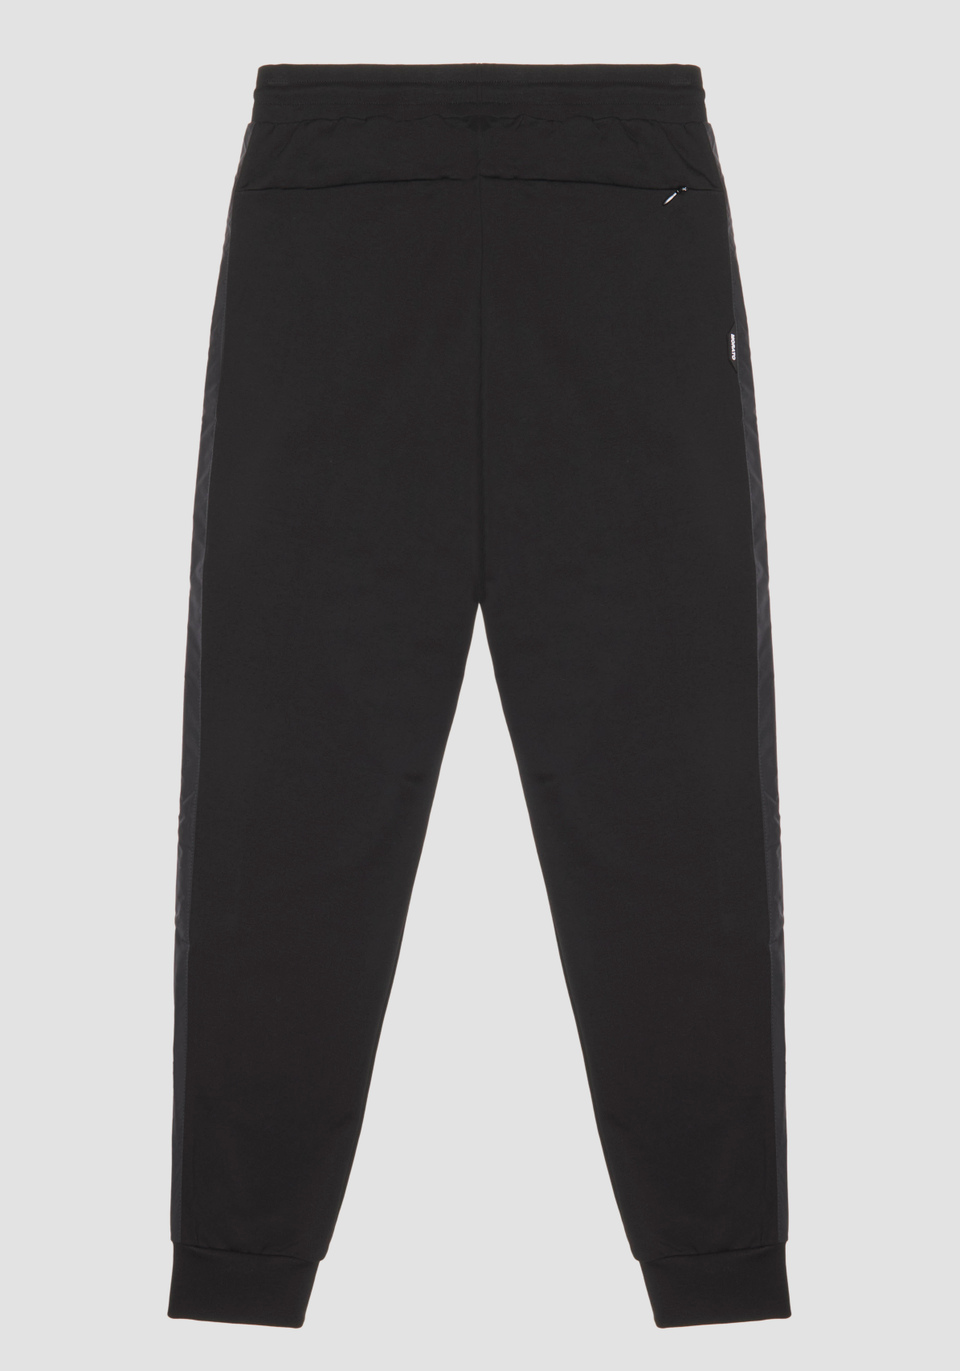 SLIM FIT SWEATPANTS IN ELASTIC COTTON WITH CONTRAST IN TECHNICAL FABRIC - Antony Morato Online Shop